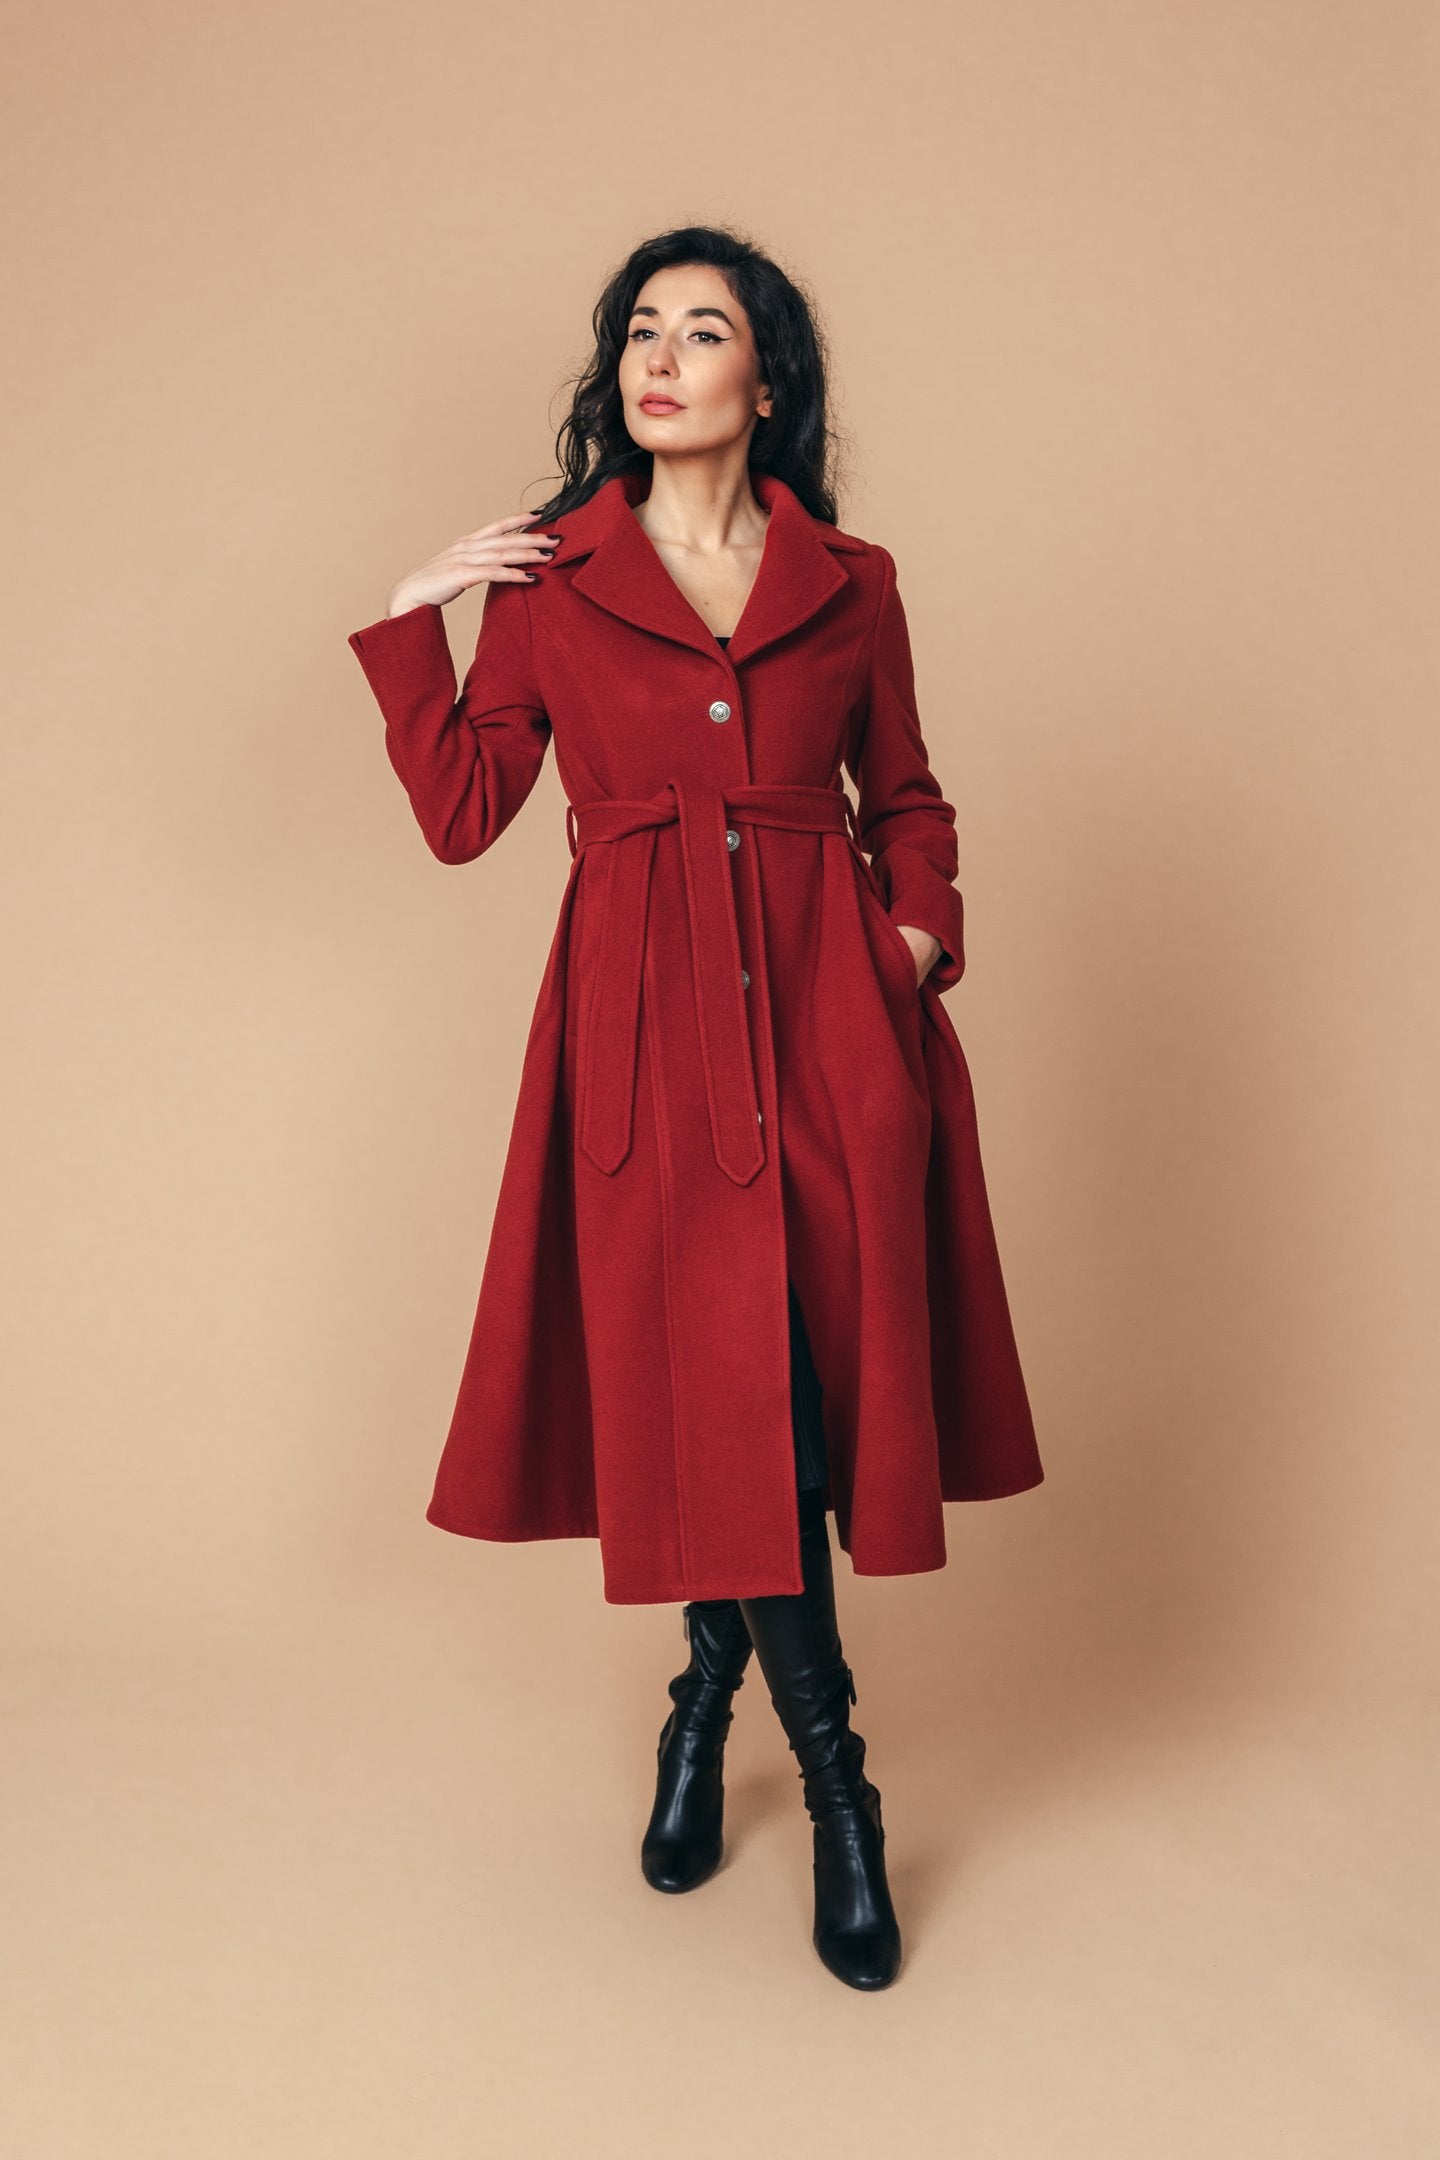 "Sloane" Coat 100% Wool With Lining in Red Brick Colour - front 3